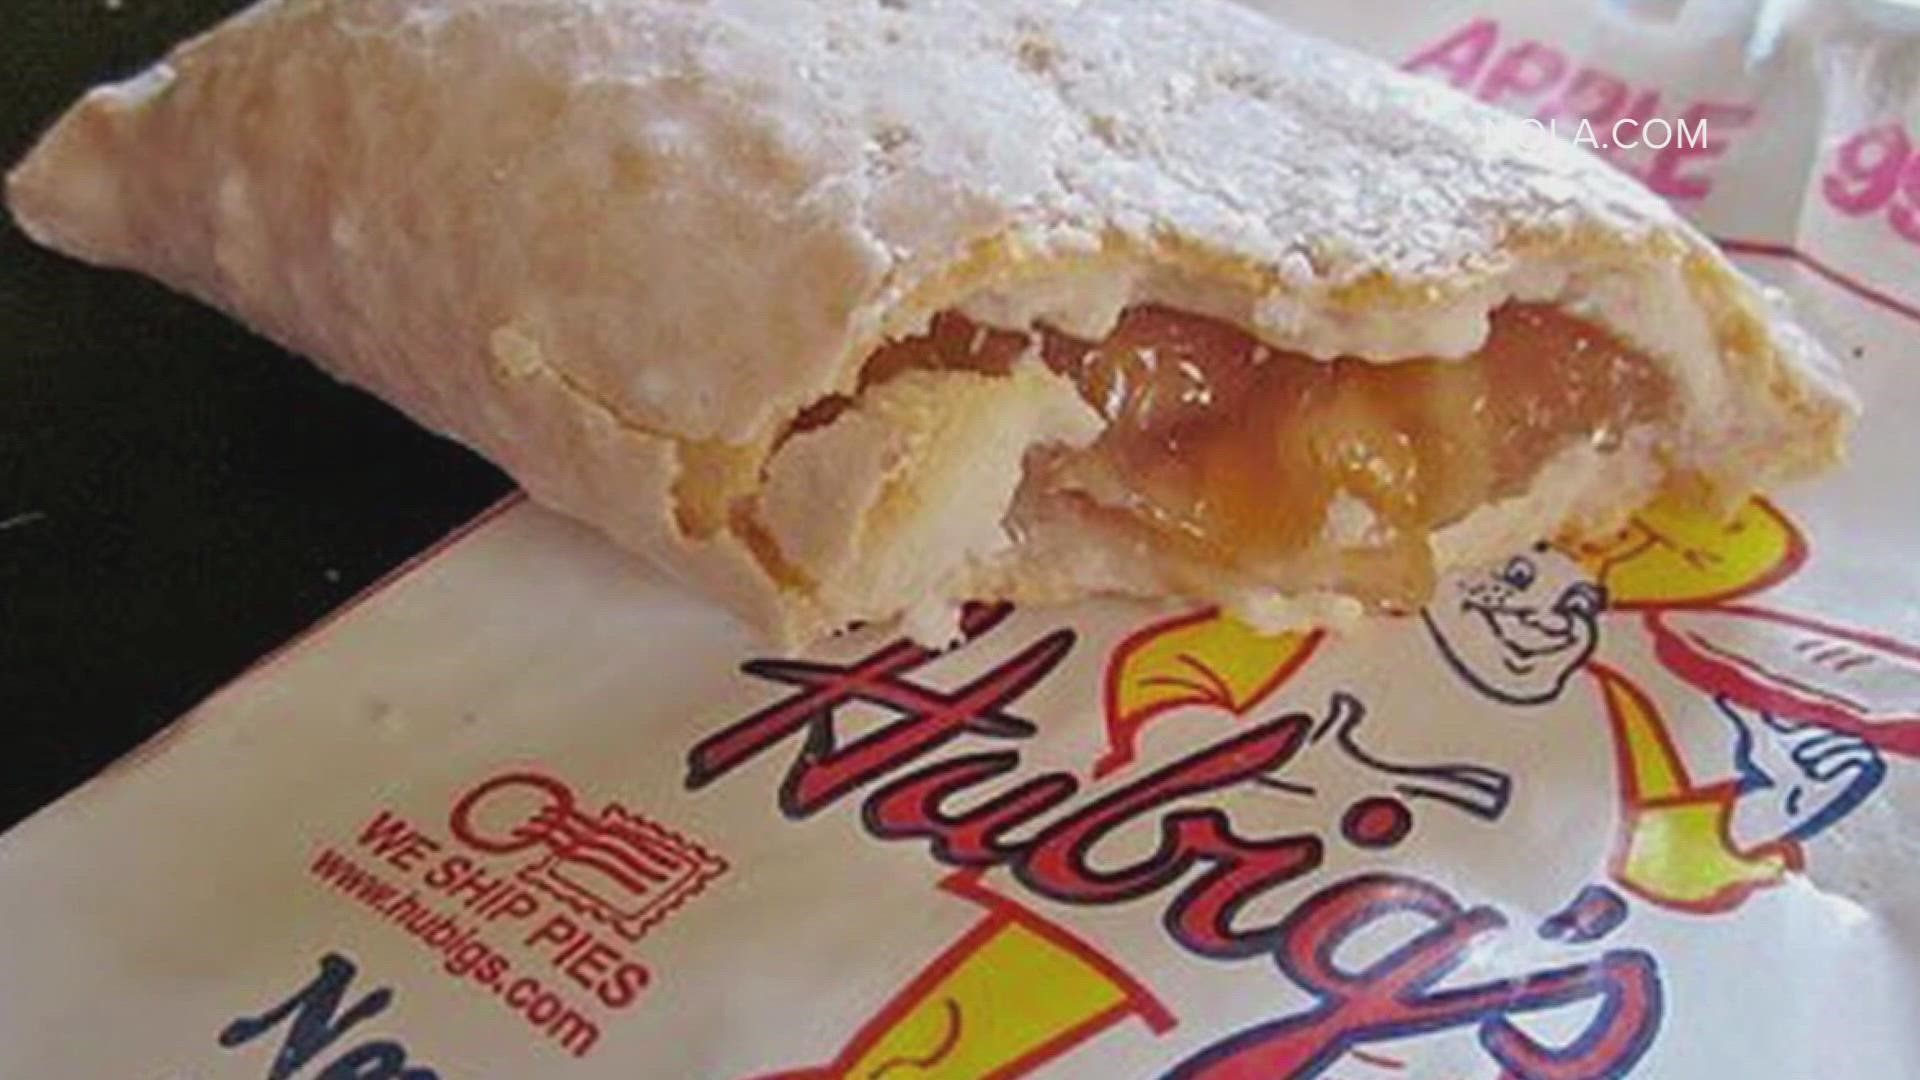 The pies may be closer than ever to returning to Louisiana.